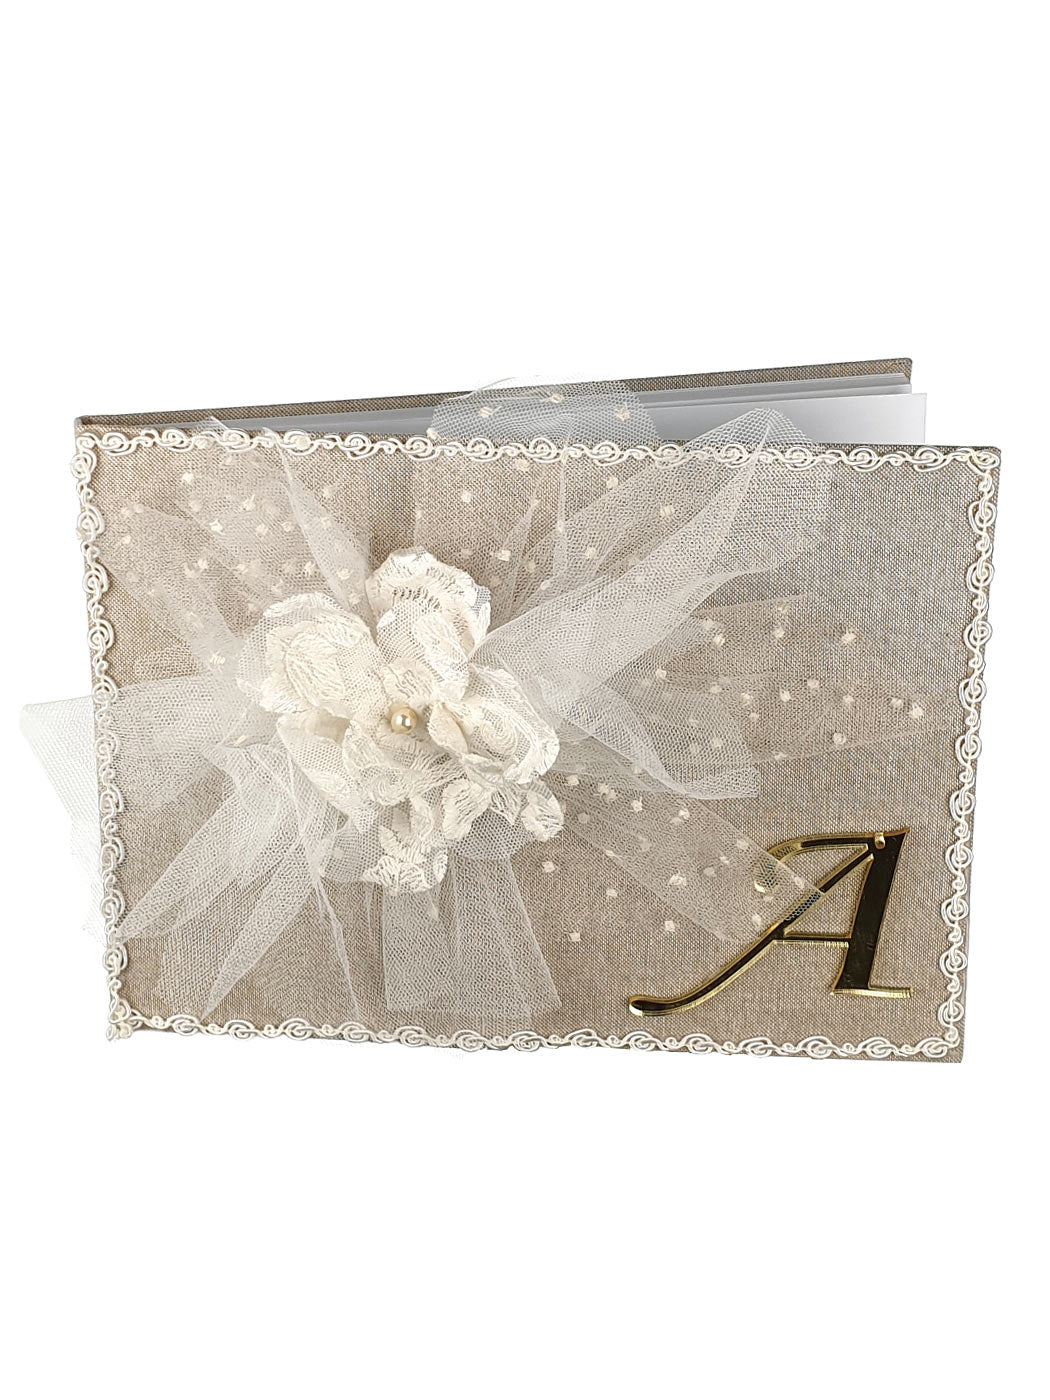 Christening wish Book with Lace & Tulle